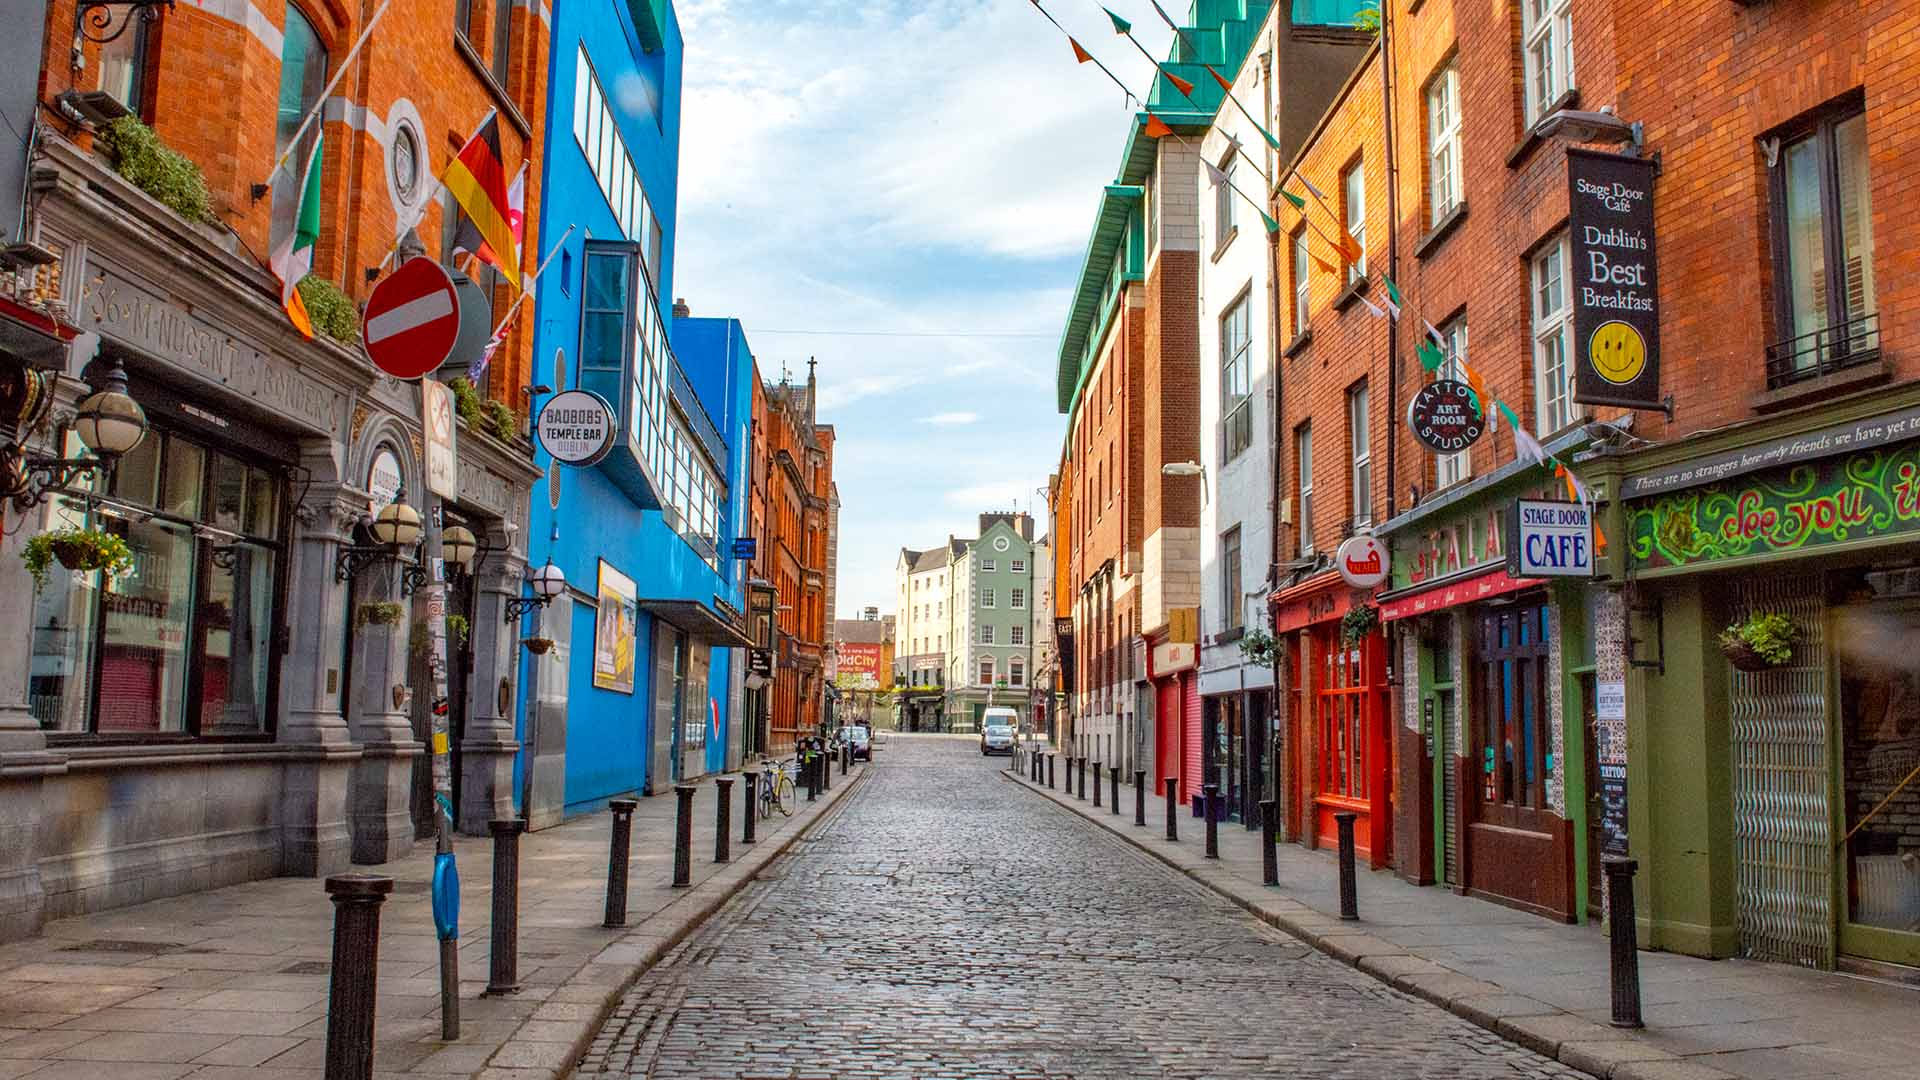 view of restaurants and bars in dublin city centre